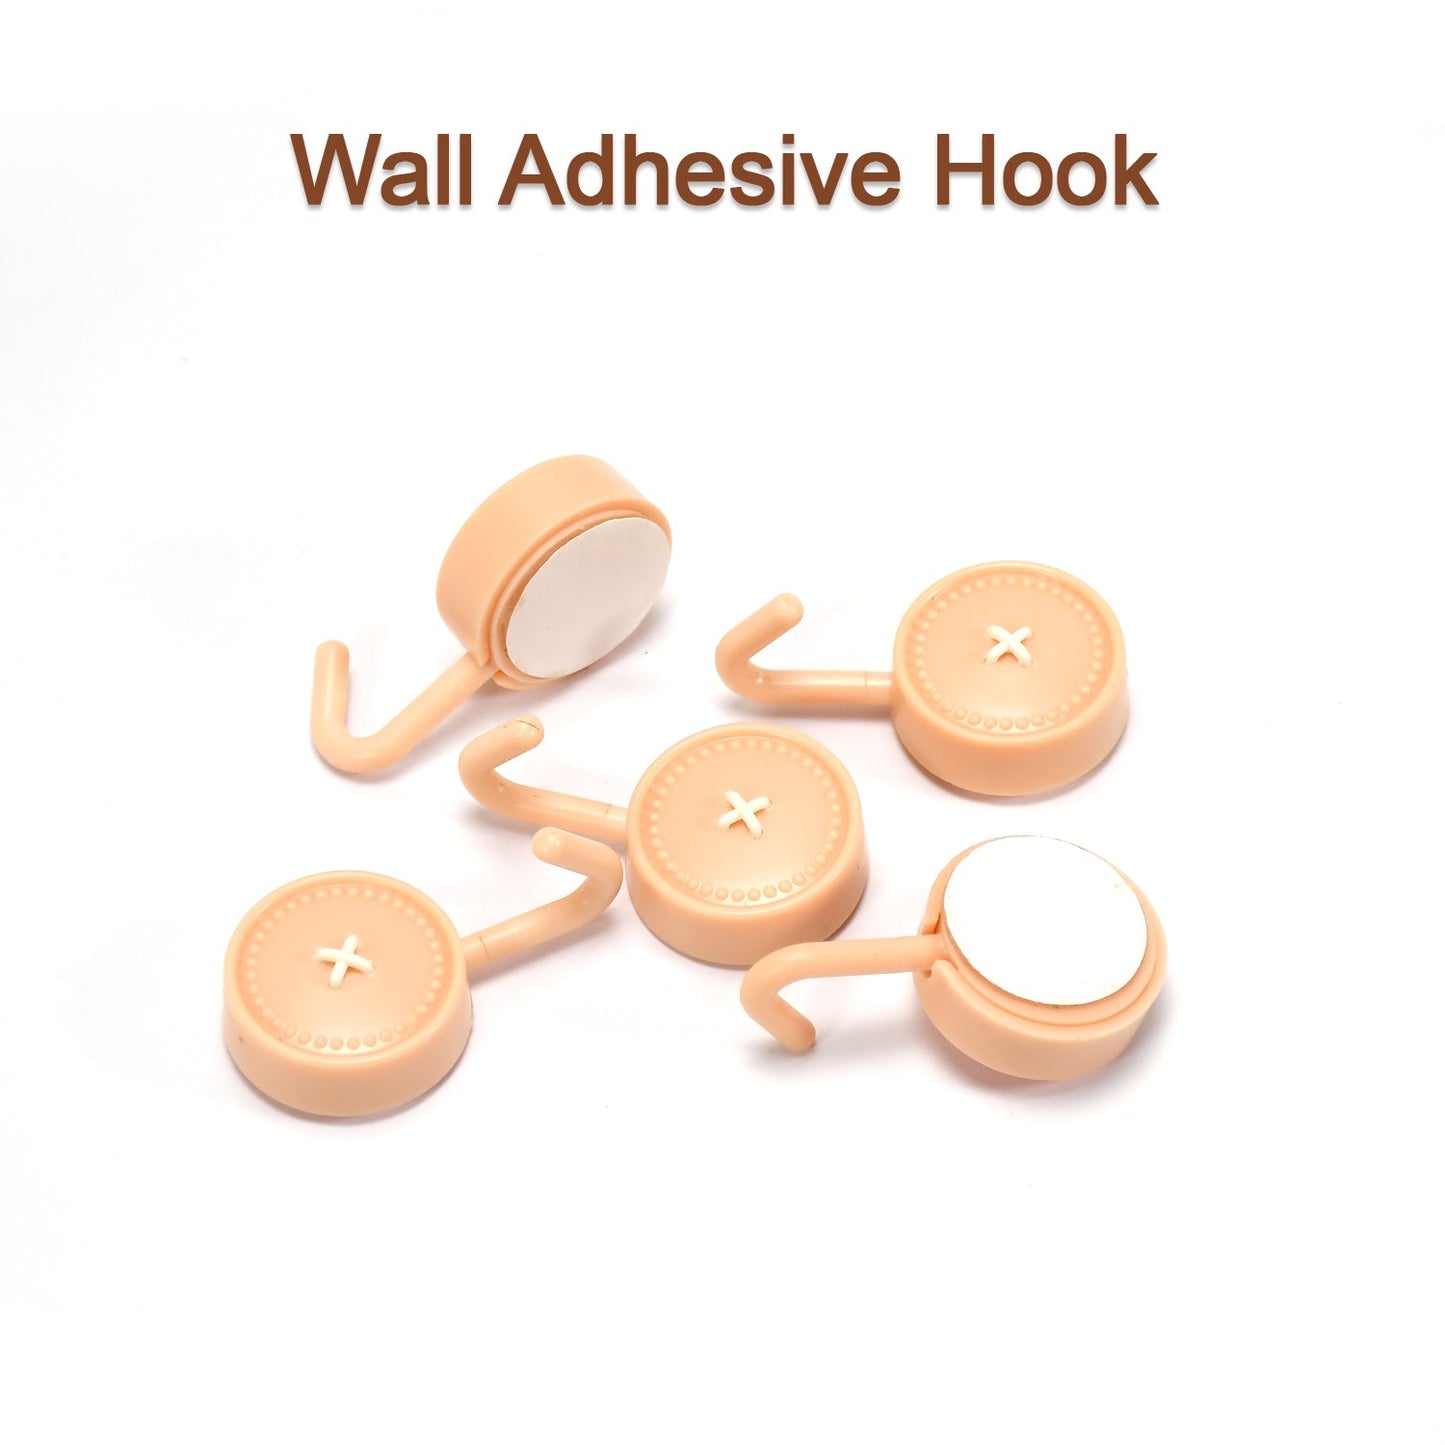 4865 Decorative Adhesive Hook 10 Pc Box Pack For Home & Multi Use Hook Pack 